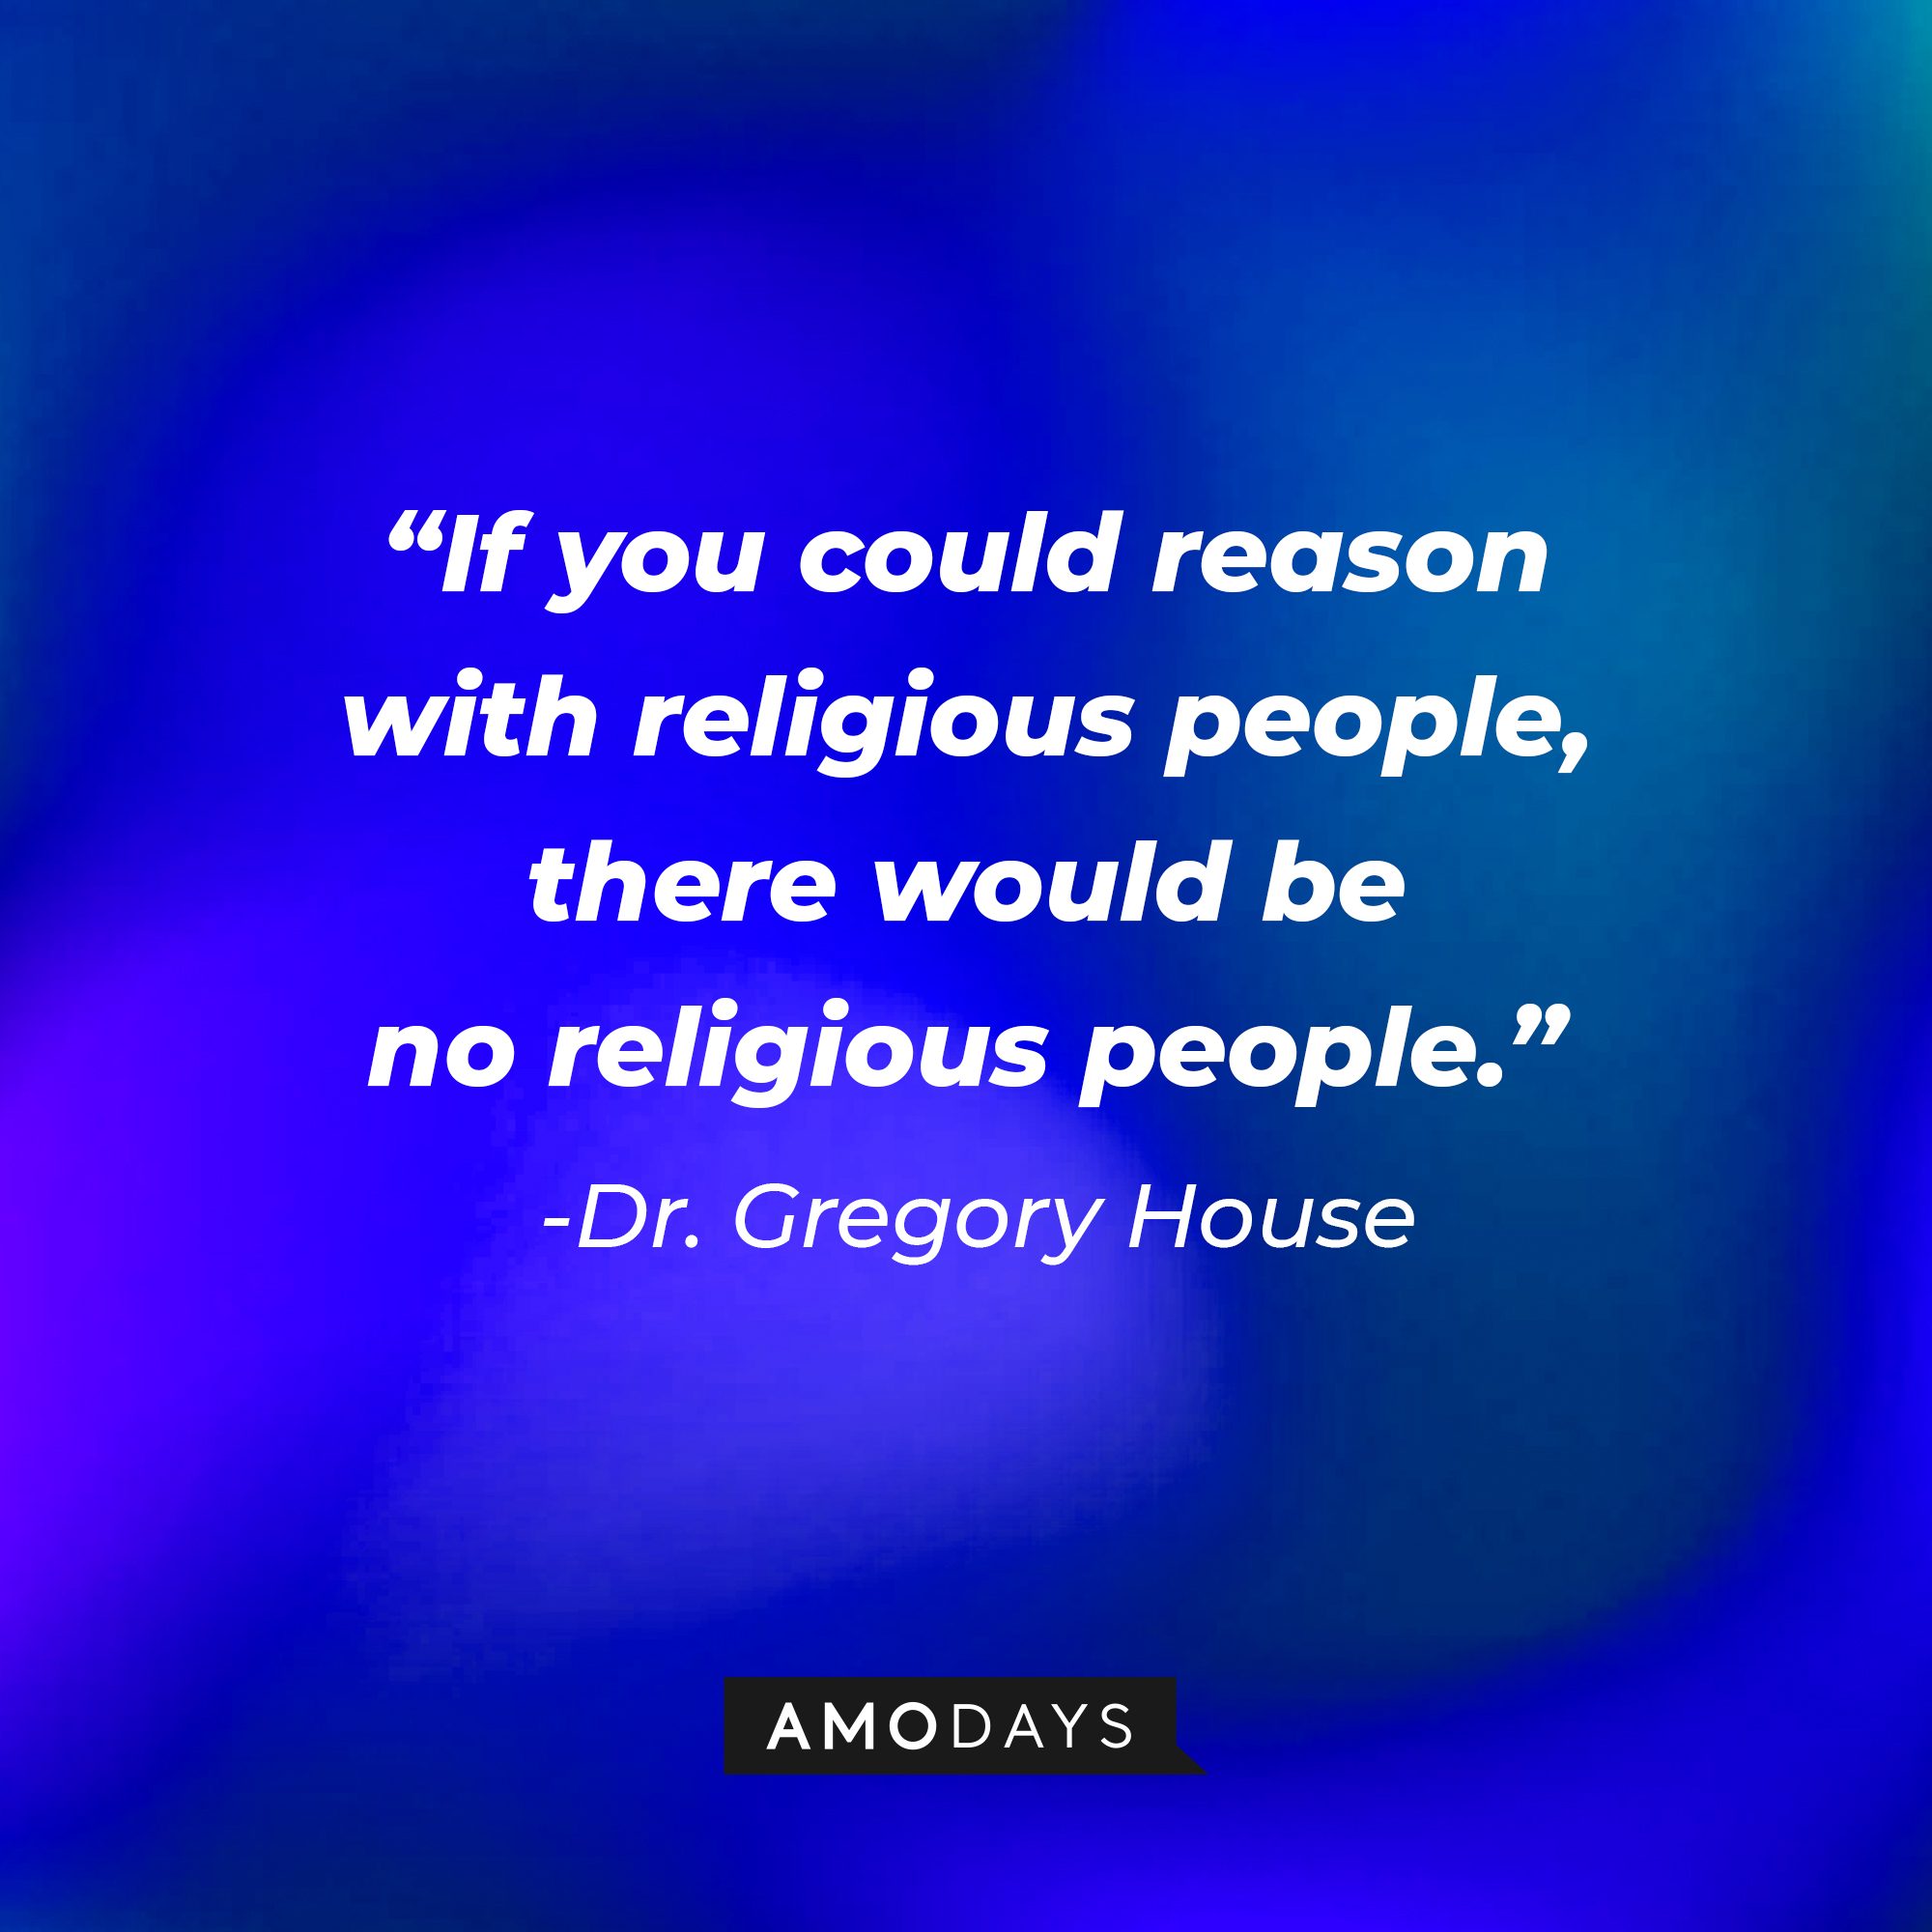 Dr. Gregory House’s quote: “If you could reason with religious people, there would be no religious people.” | Source: AmoDays